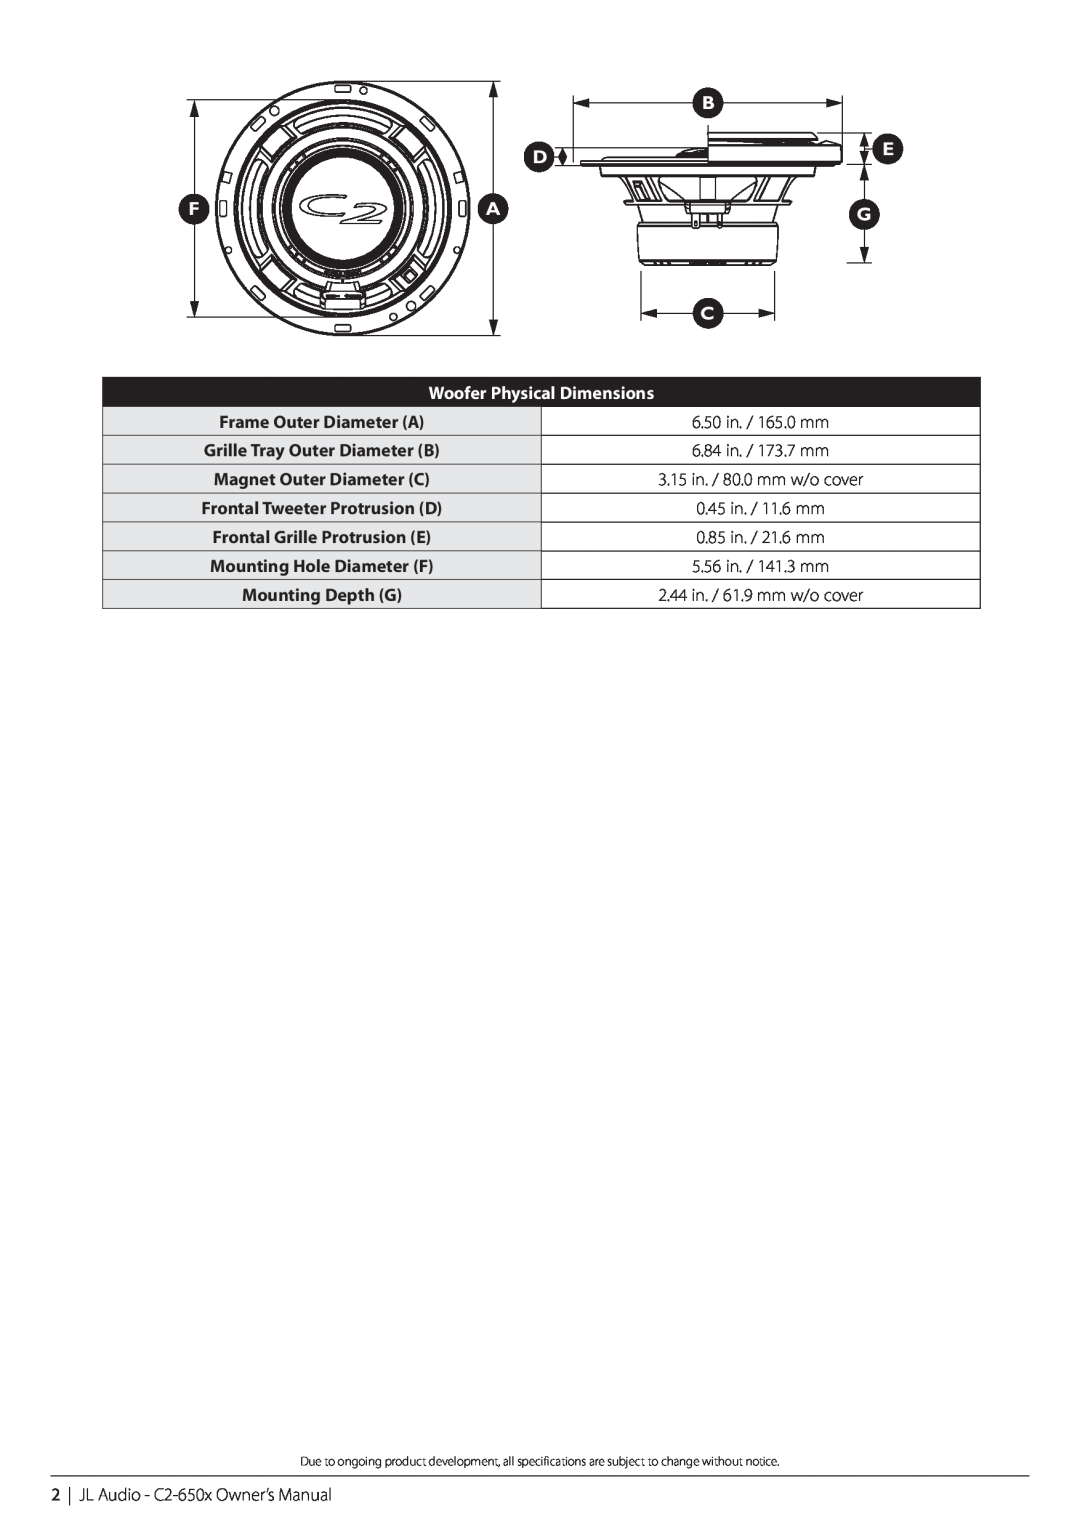 JL Audio C2-650x-06112008 owner manual F A C, Woofer Physical Dimensions, Frame Outer Diameter A, 6.50 in. / 165.0 mm 